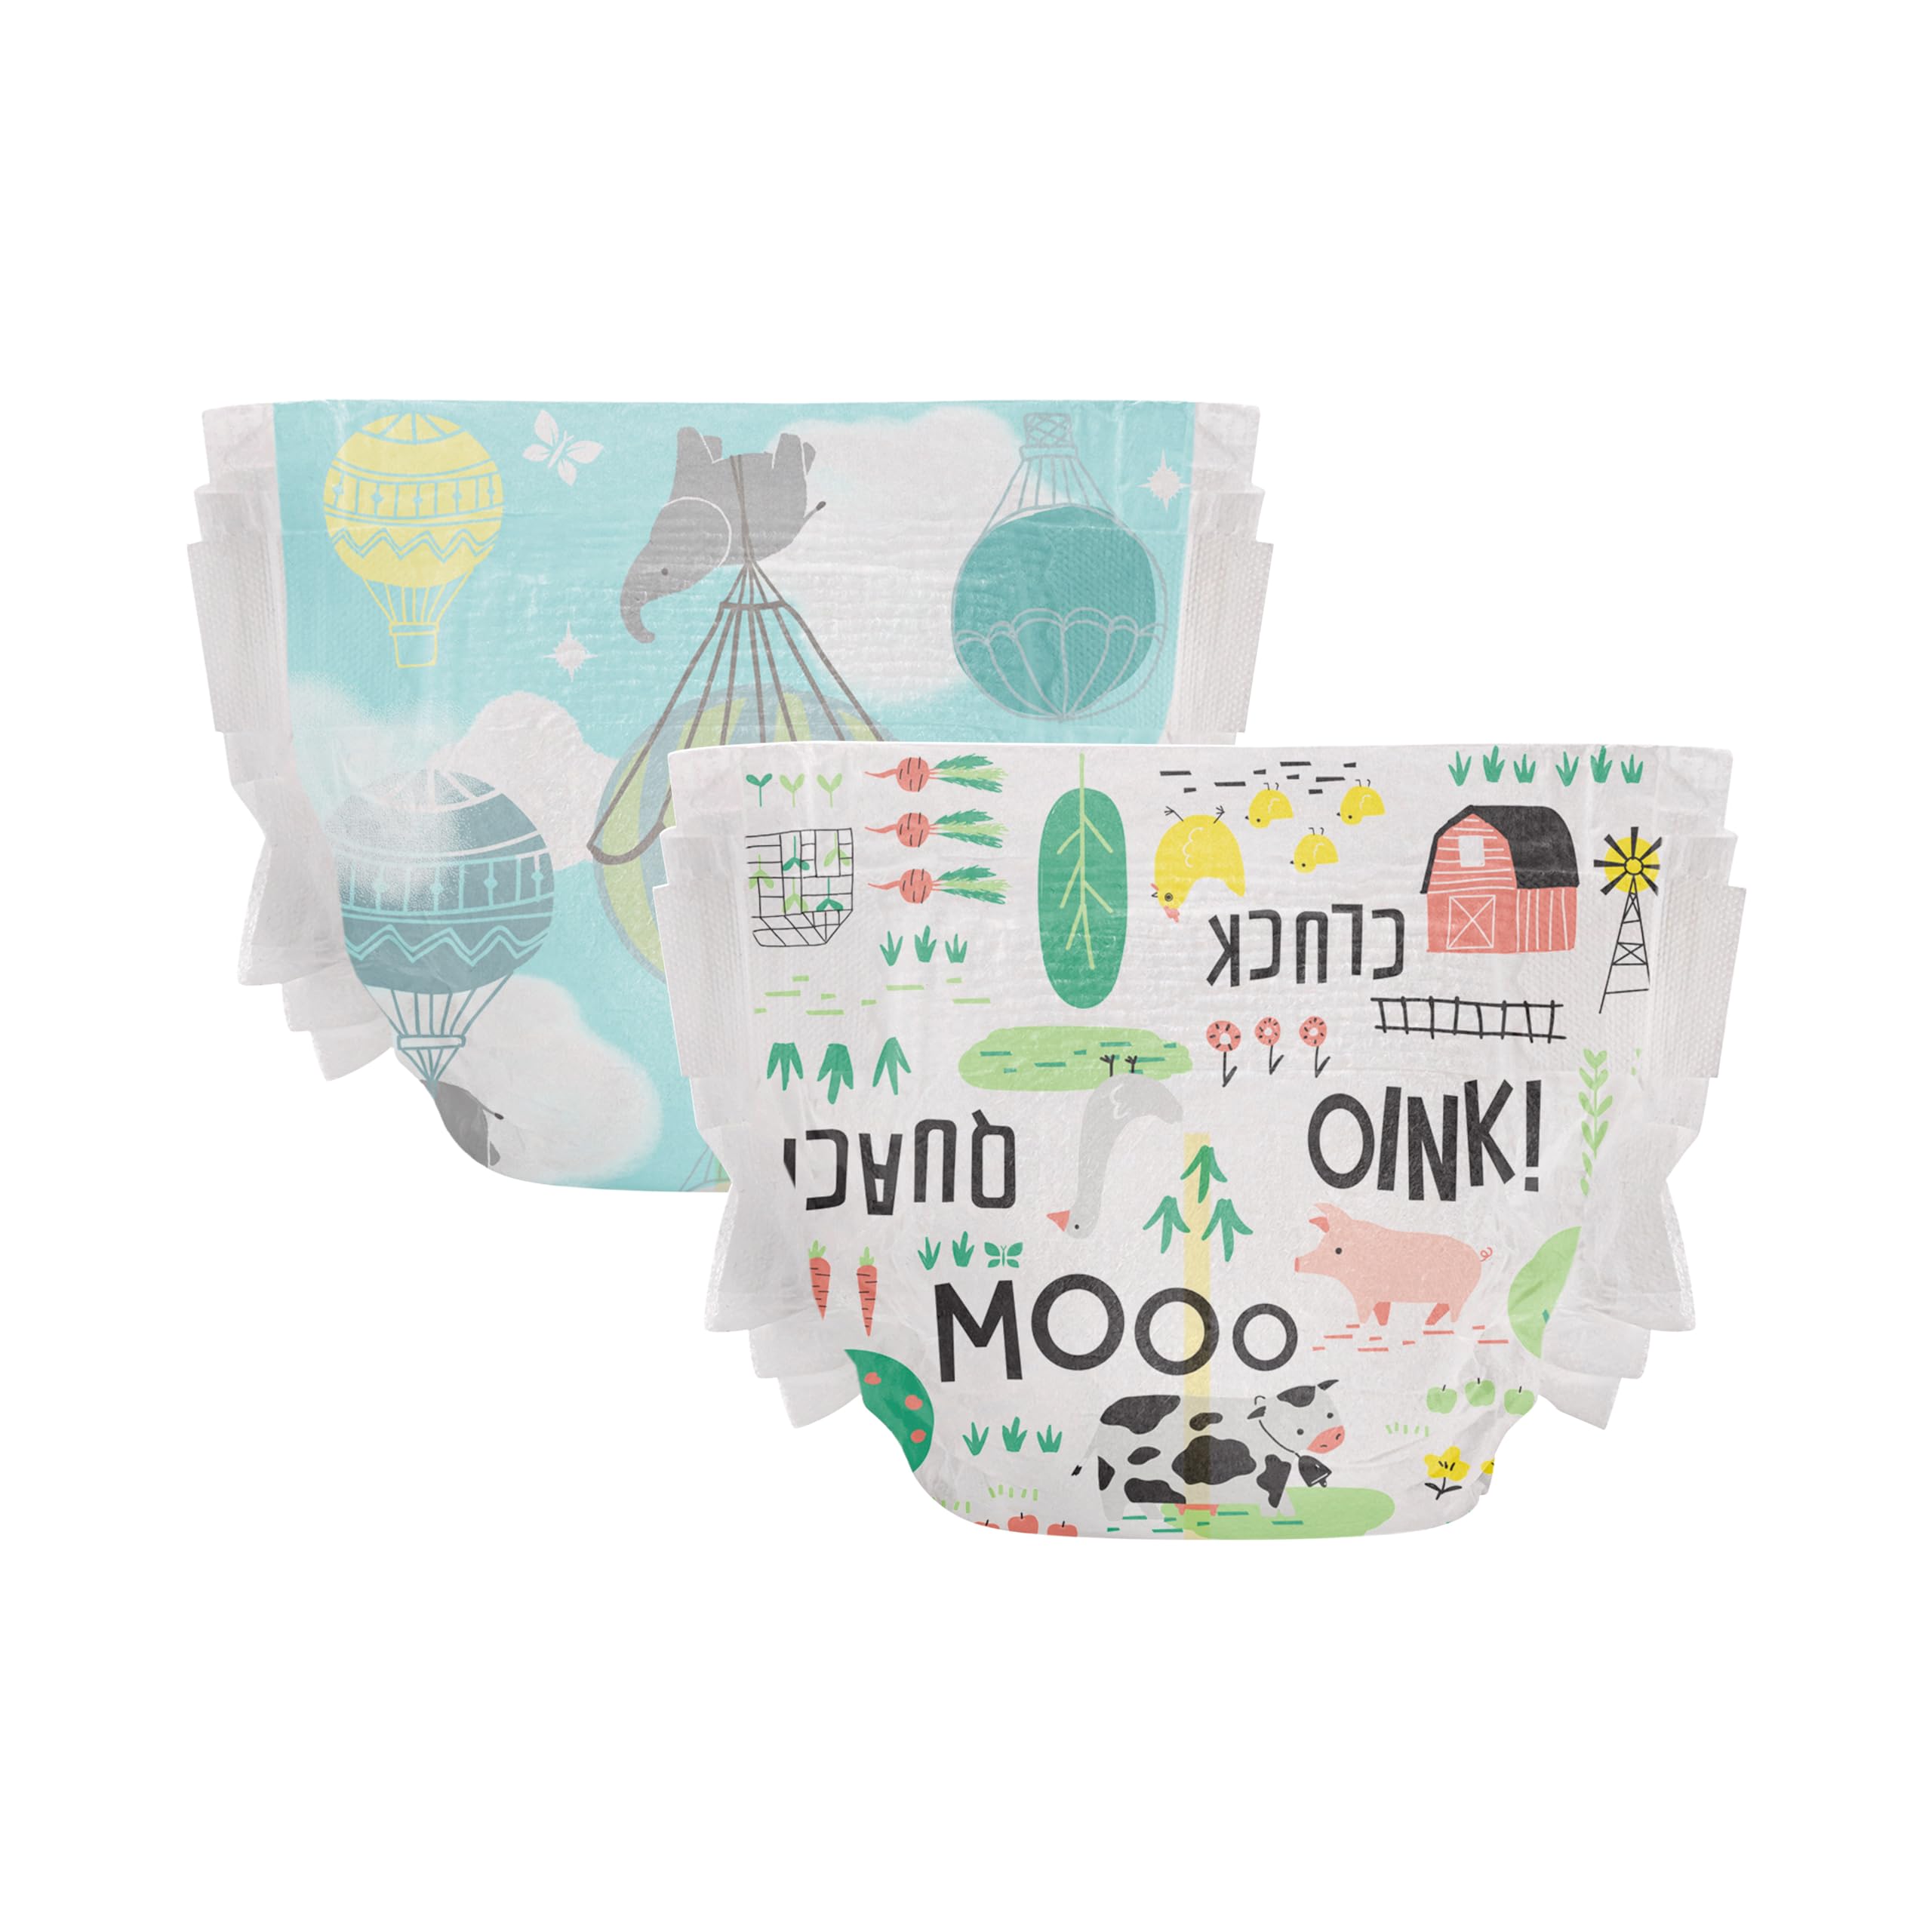 The Honest Company Clean Conscious Diapers | Plant-Based, Sustainable | Above It All + Barnyard Babies | Club Box, Size 1 (8-14 lbs), 78 Count